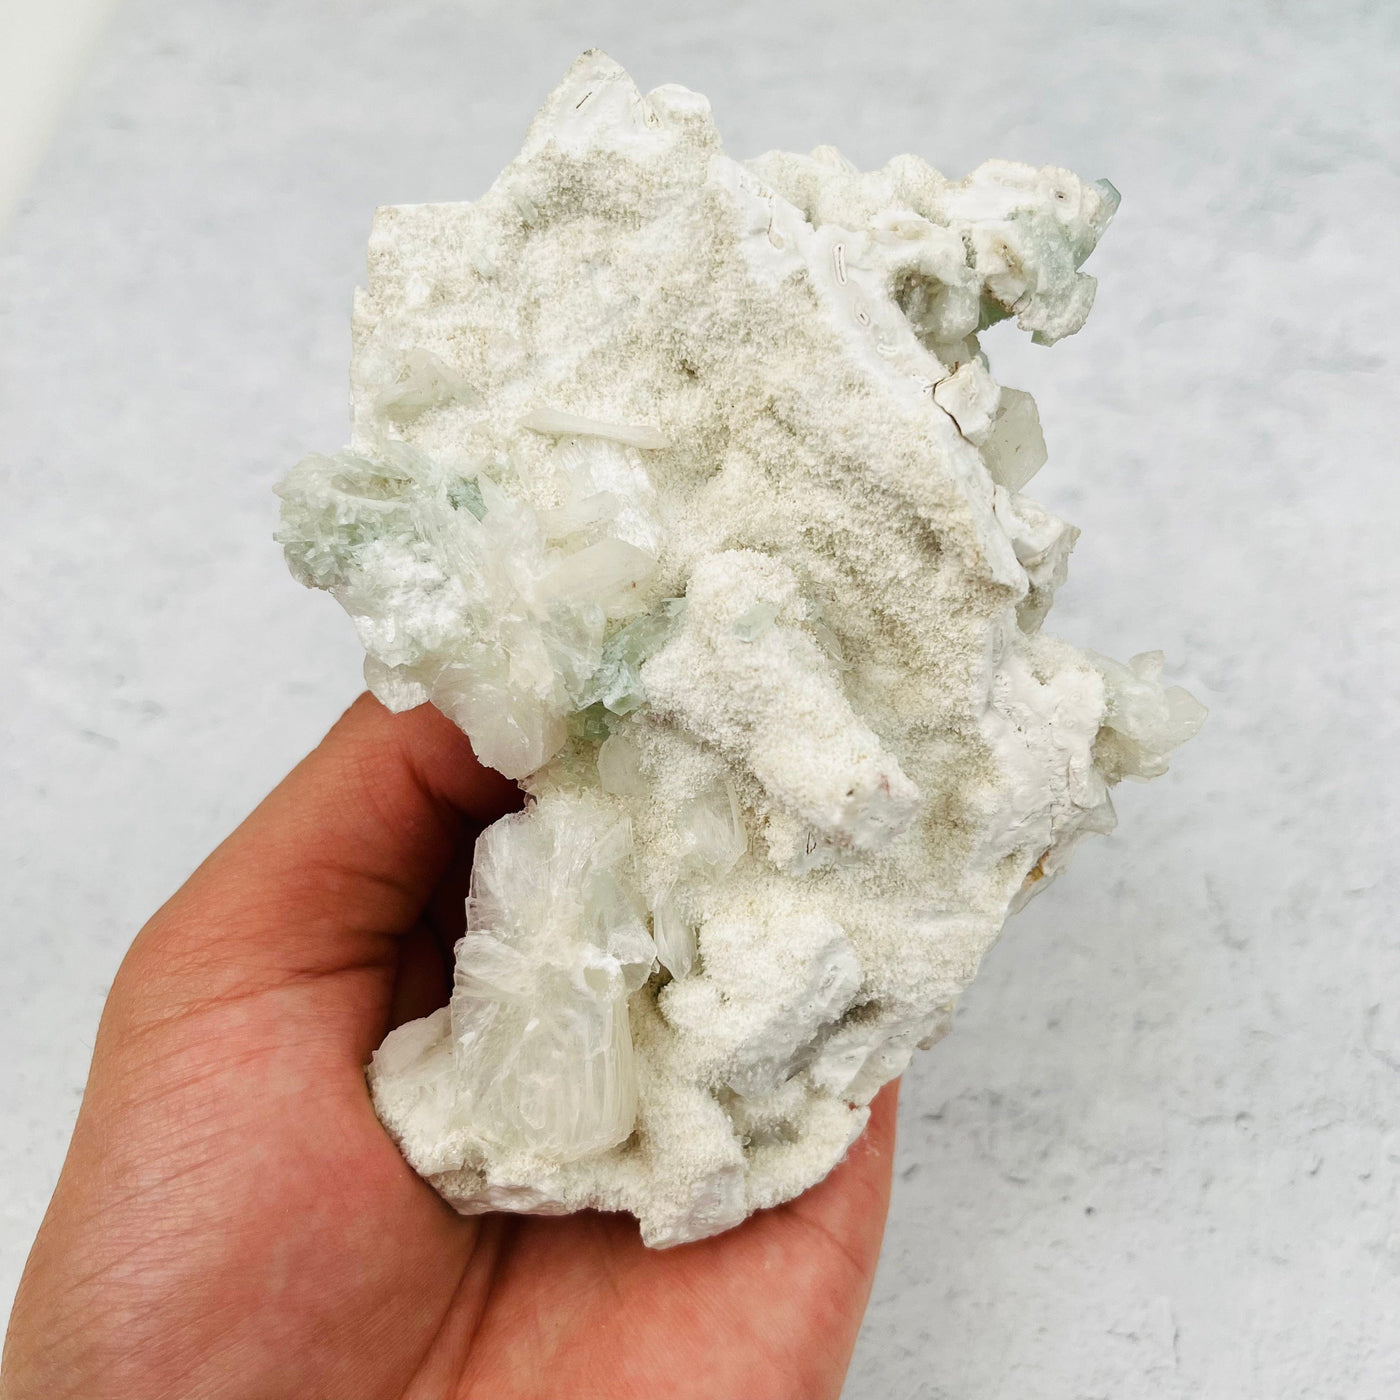 Green Apophyllite with Stilbite  Zeolites - With Hand For Sizing Reference Back